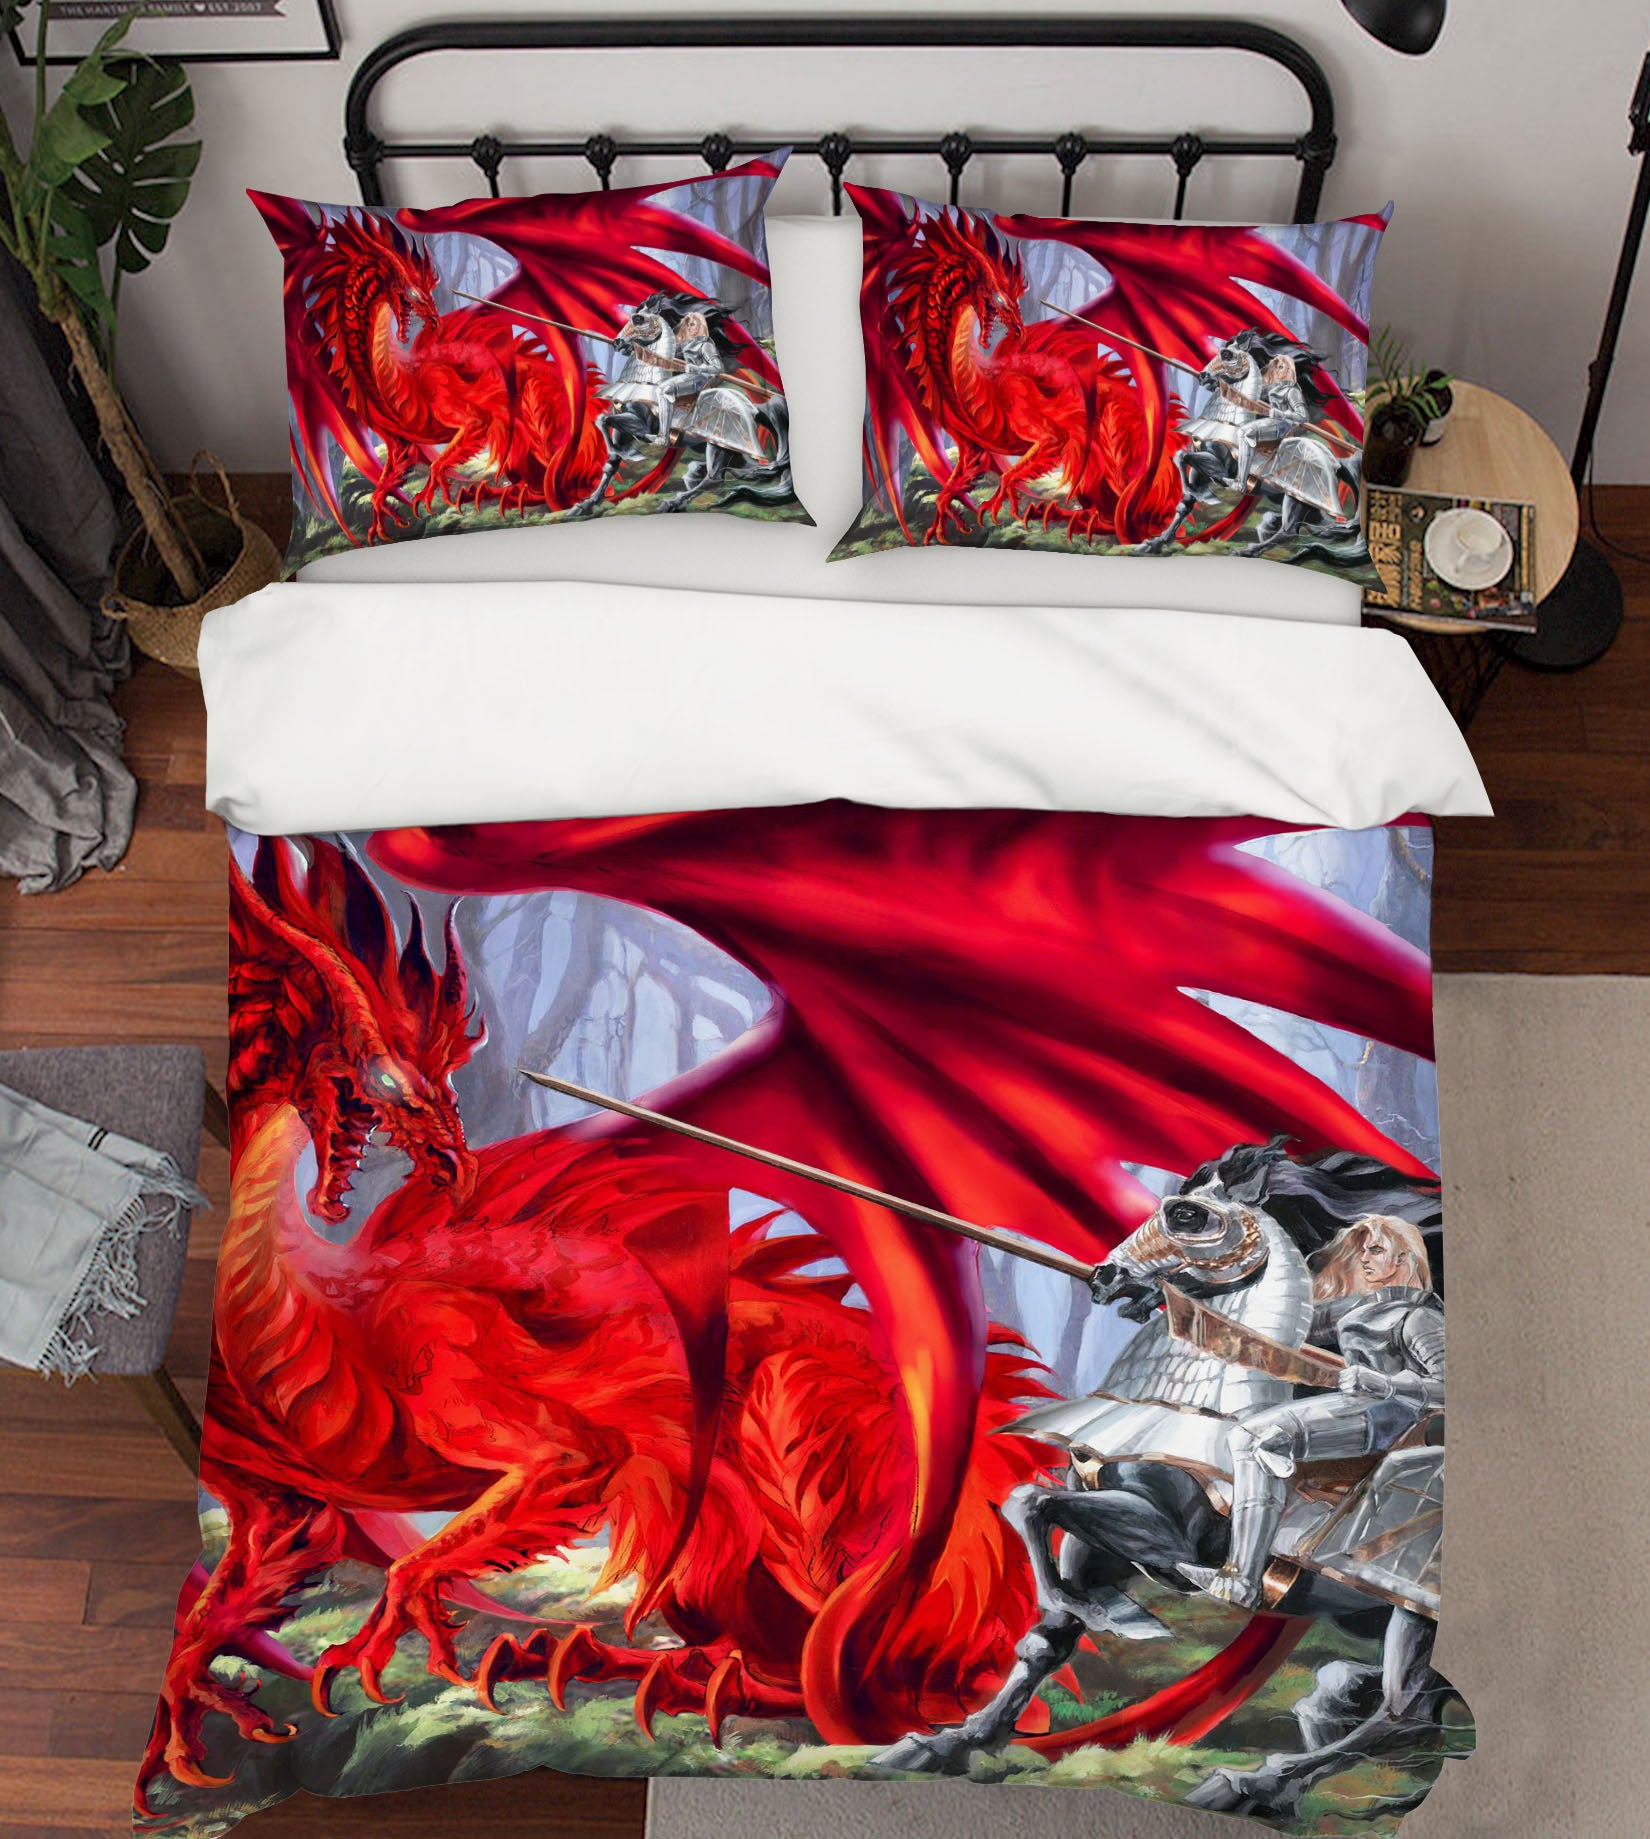 3D Red Dragon 8307 Ruth Thompson Bedding Bed Pillowcases Quilt Cover Duvet Cover